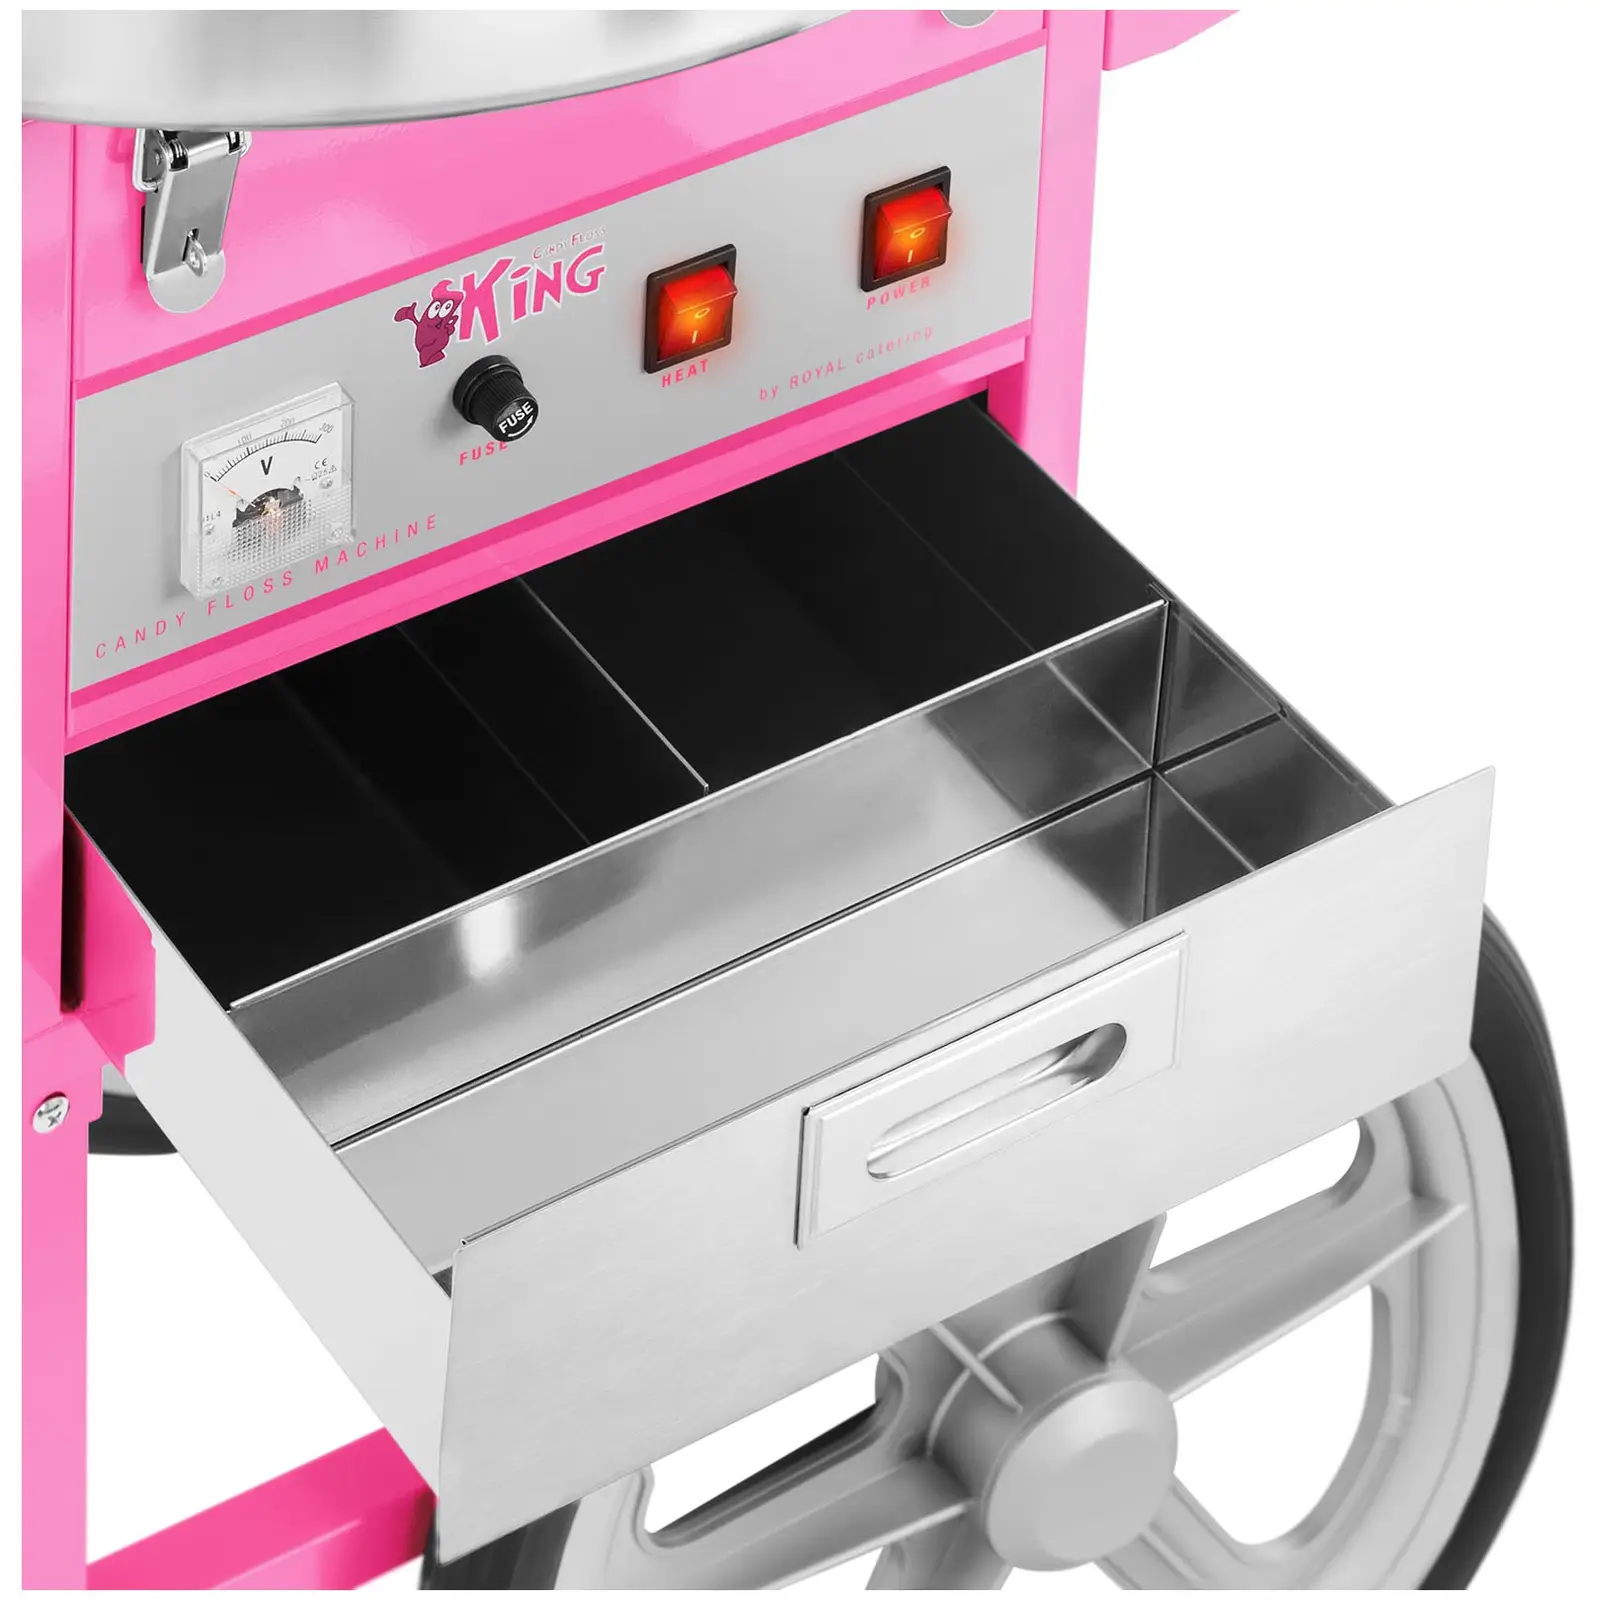 Commercial Candy Floss Machine - 72 cm - 1200 W - Incl. Wagon